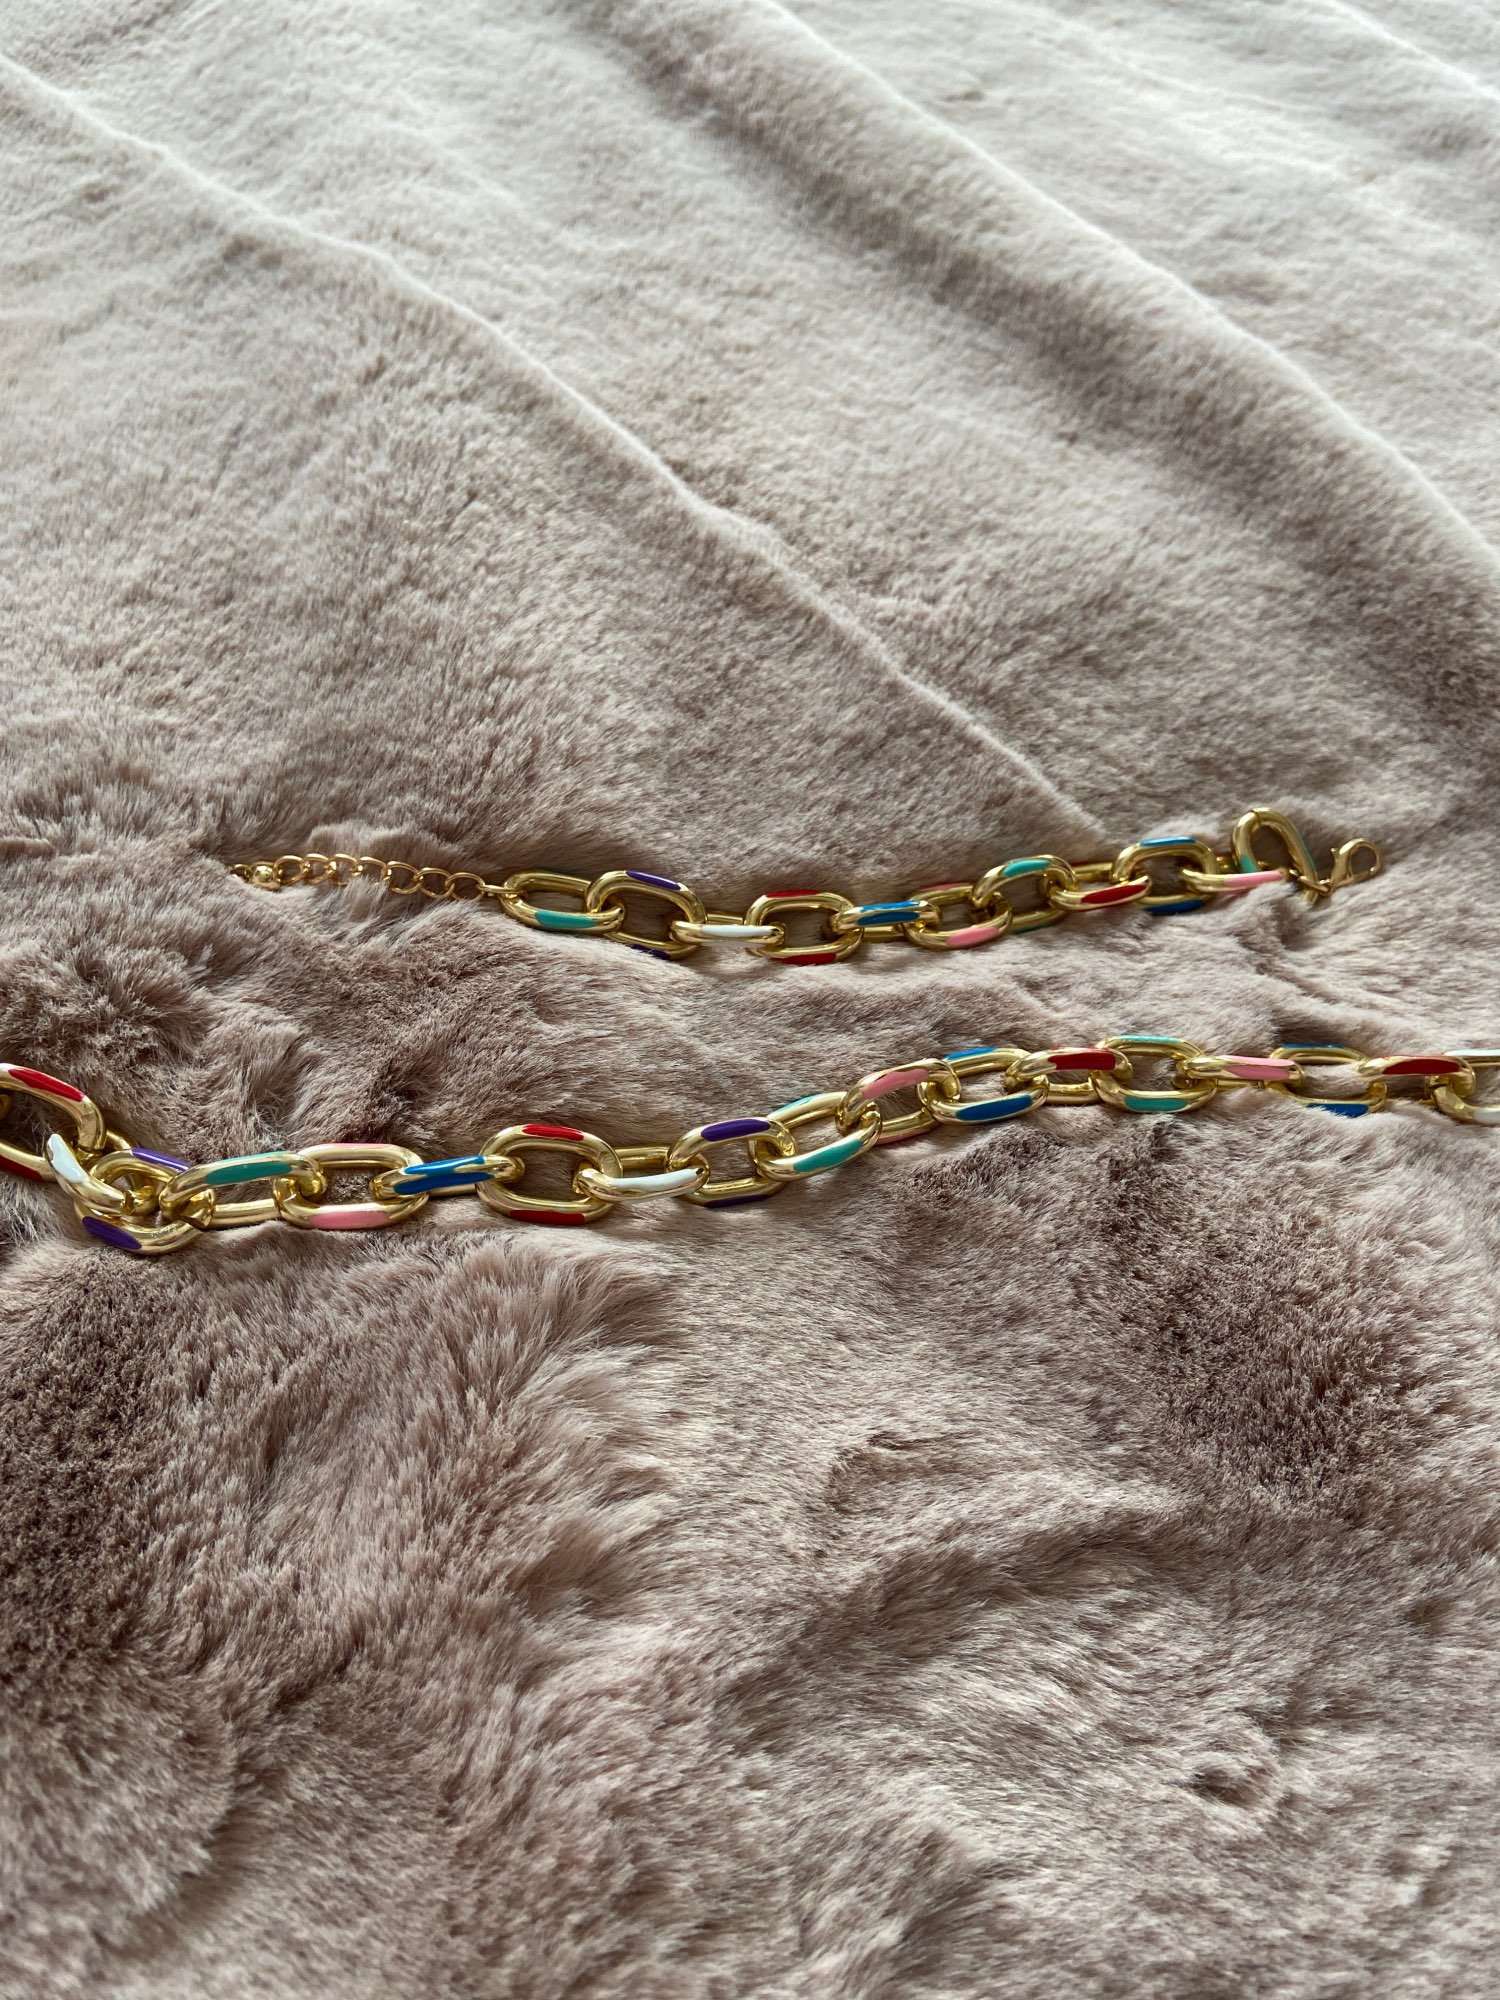 Colorful Cable Chain